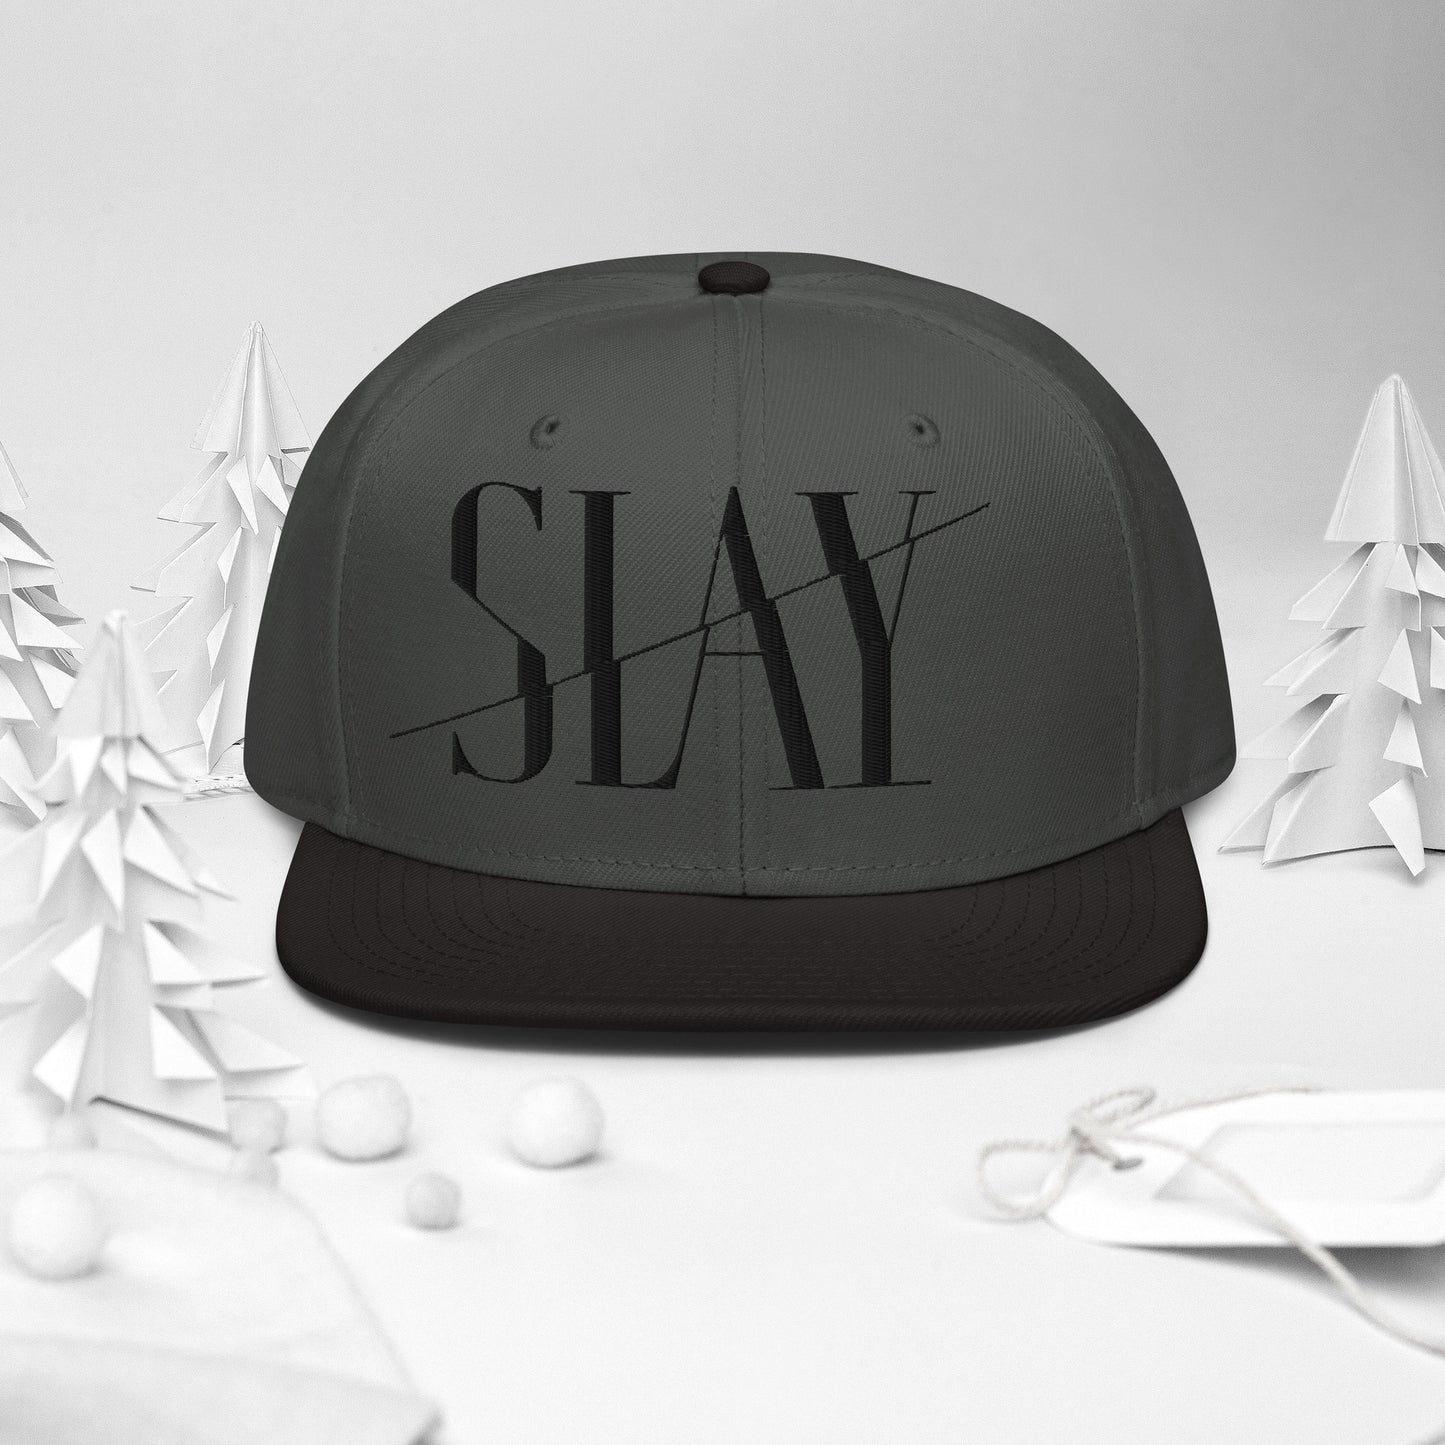 Front view of a black and grey Snapback Hat with the word "SLAY" embroidered on the front.